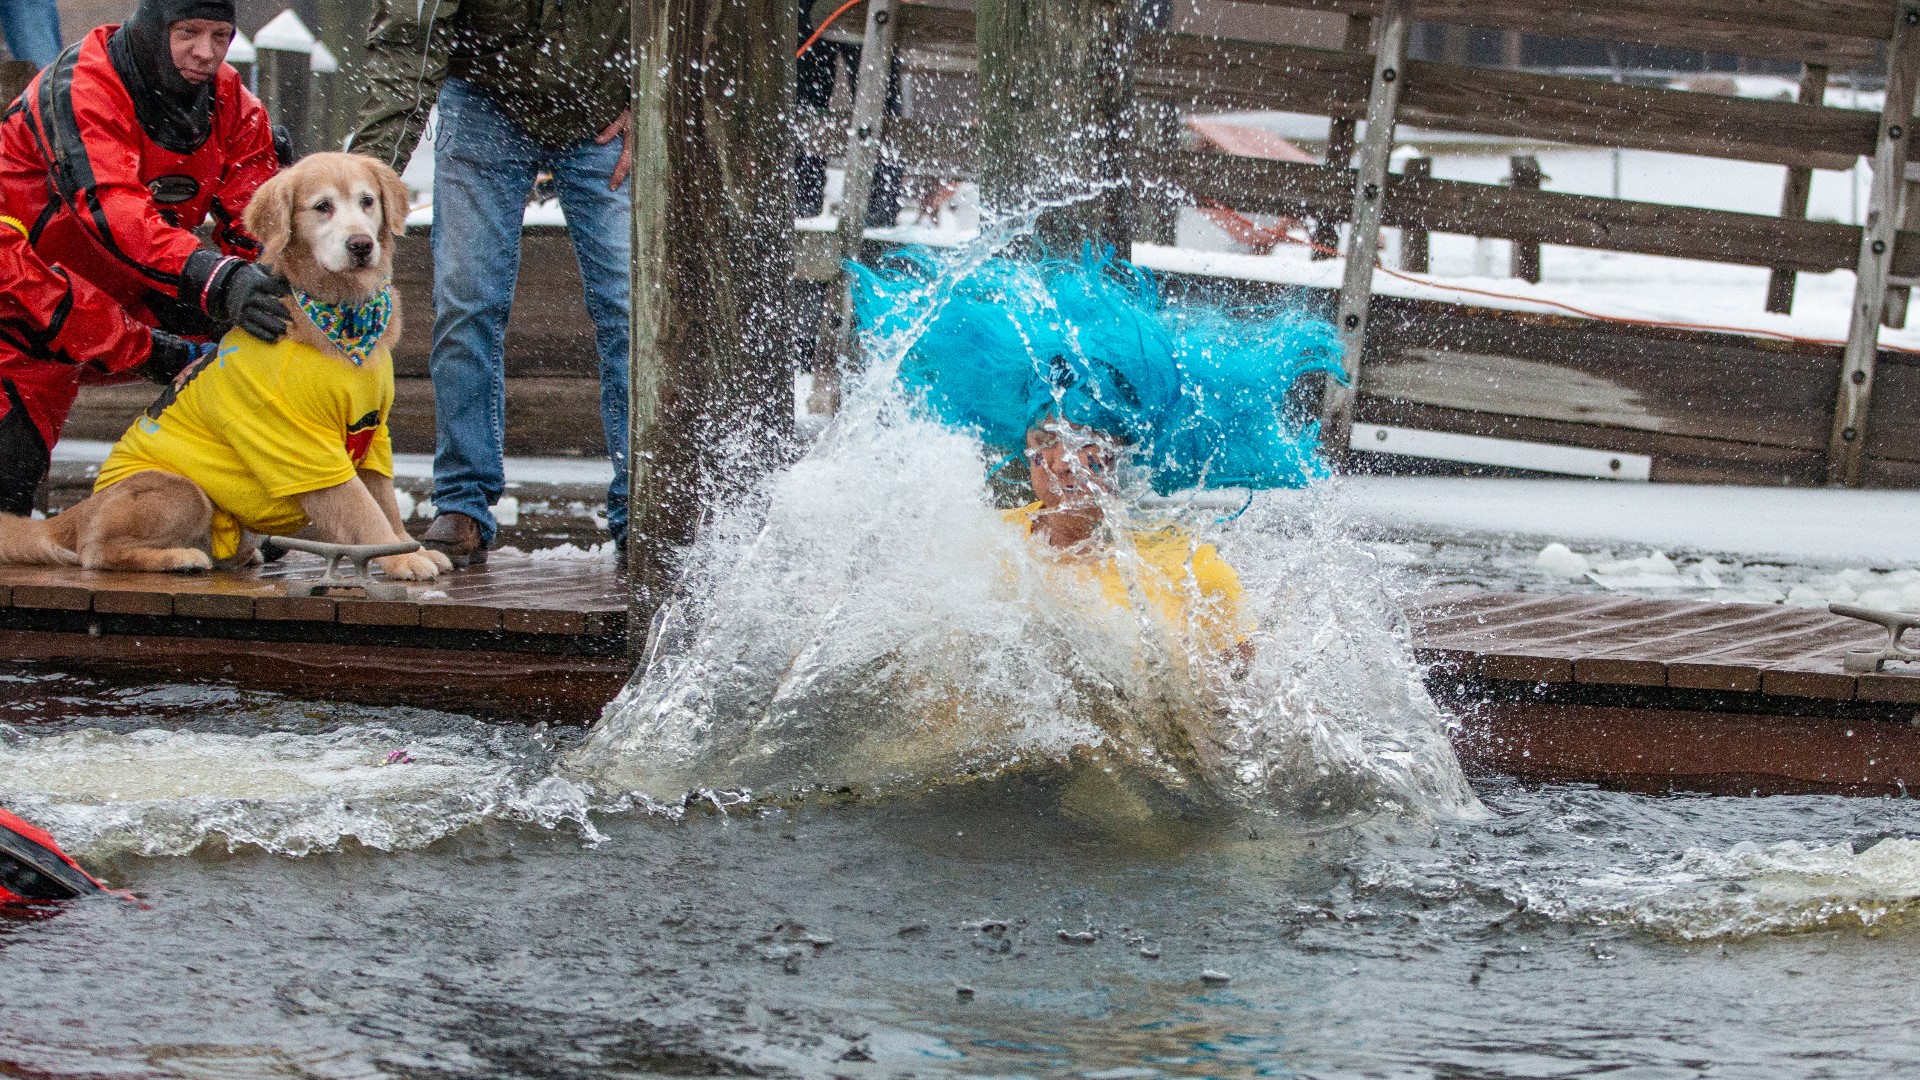 Muskegon Polar Plunge raises recordbreaking 130,000 for Special